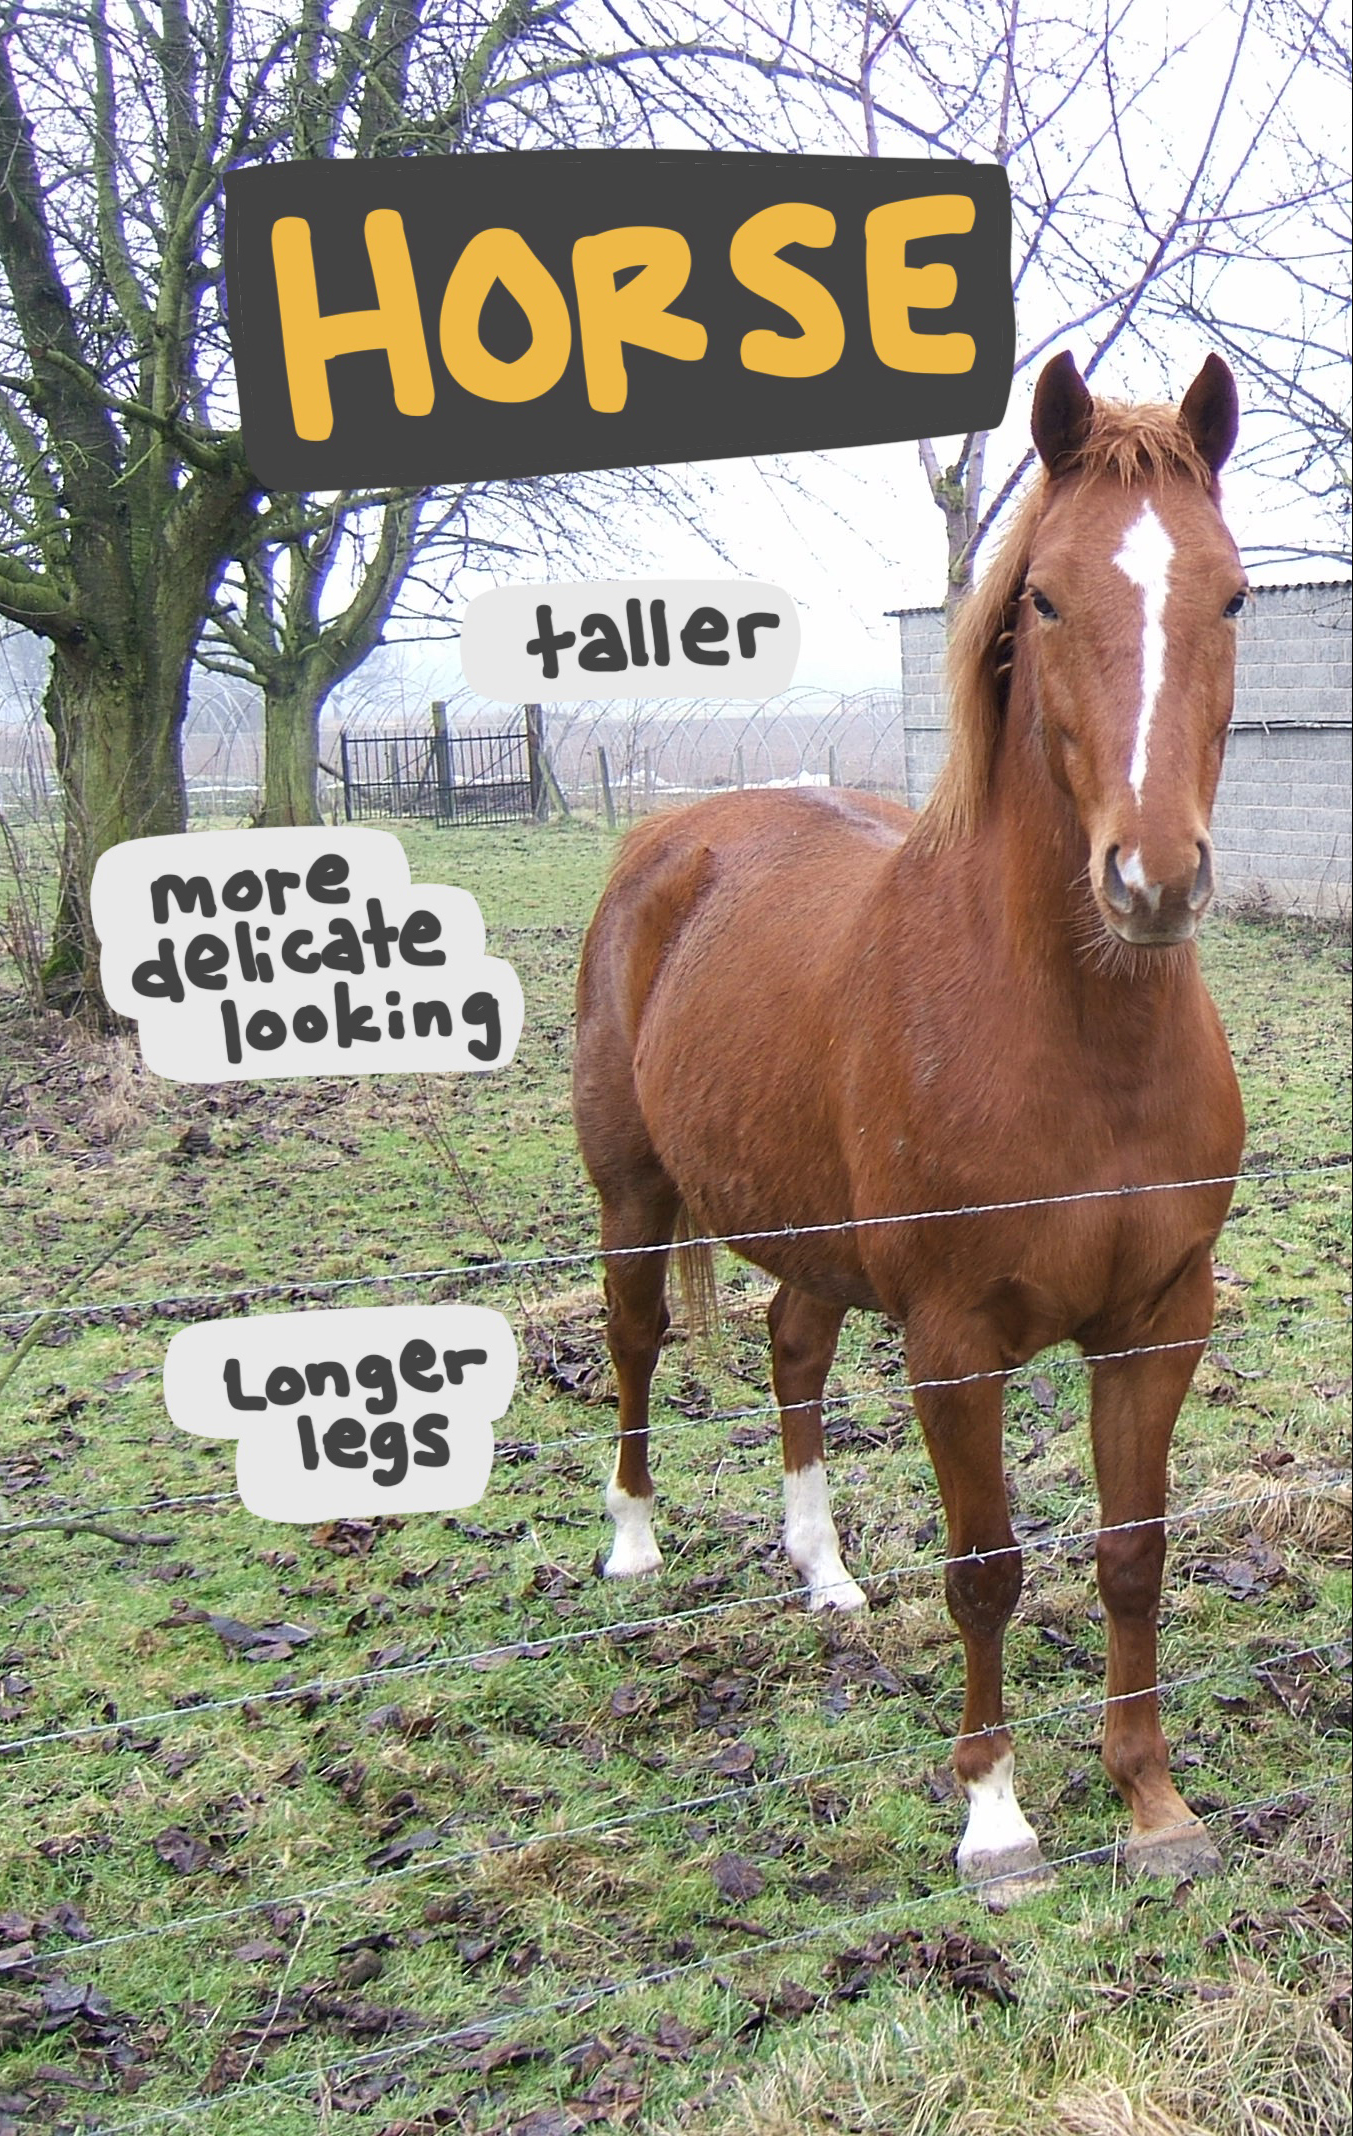 A horse standing at a fenceline, annotated with words describing full size horses.